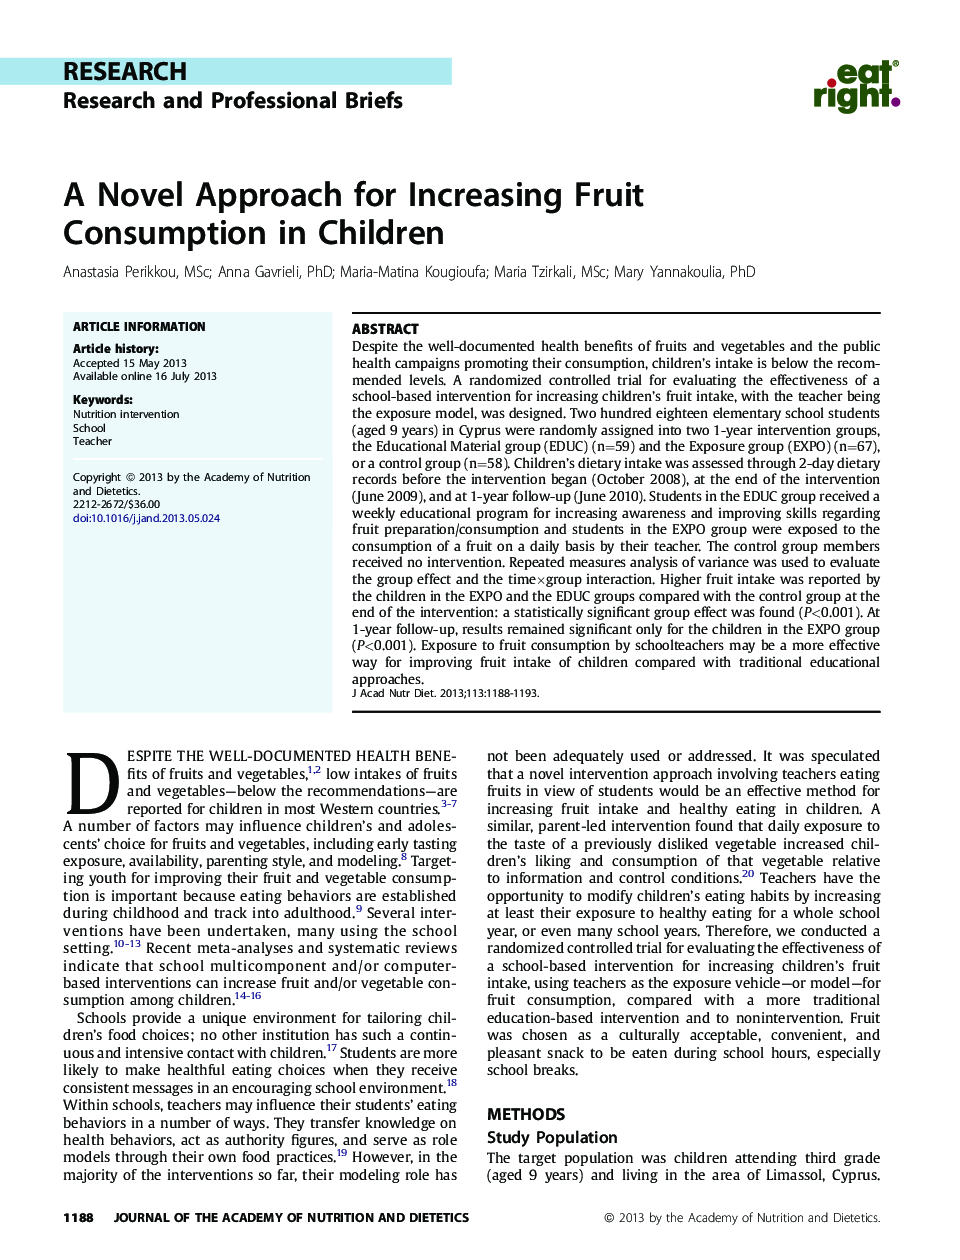 ResearchResearch and Professional BriefsA Novel Approach for Increasing Fruit ConsumptionÂ inÂ Children